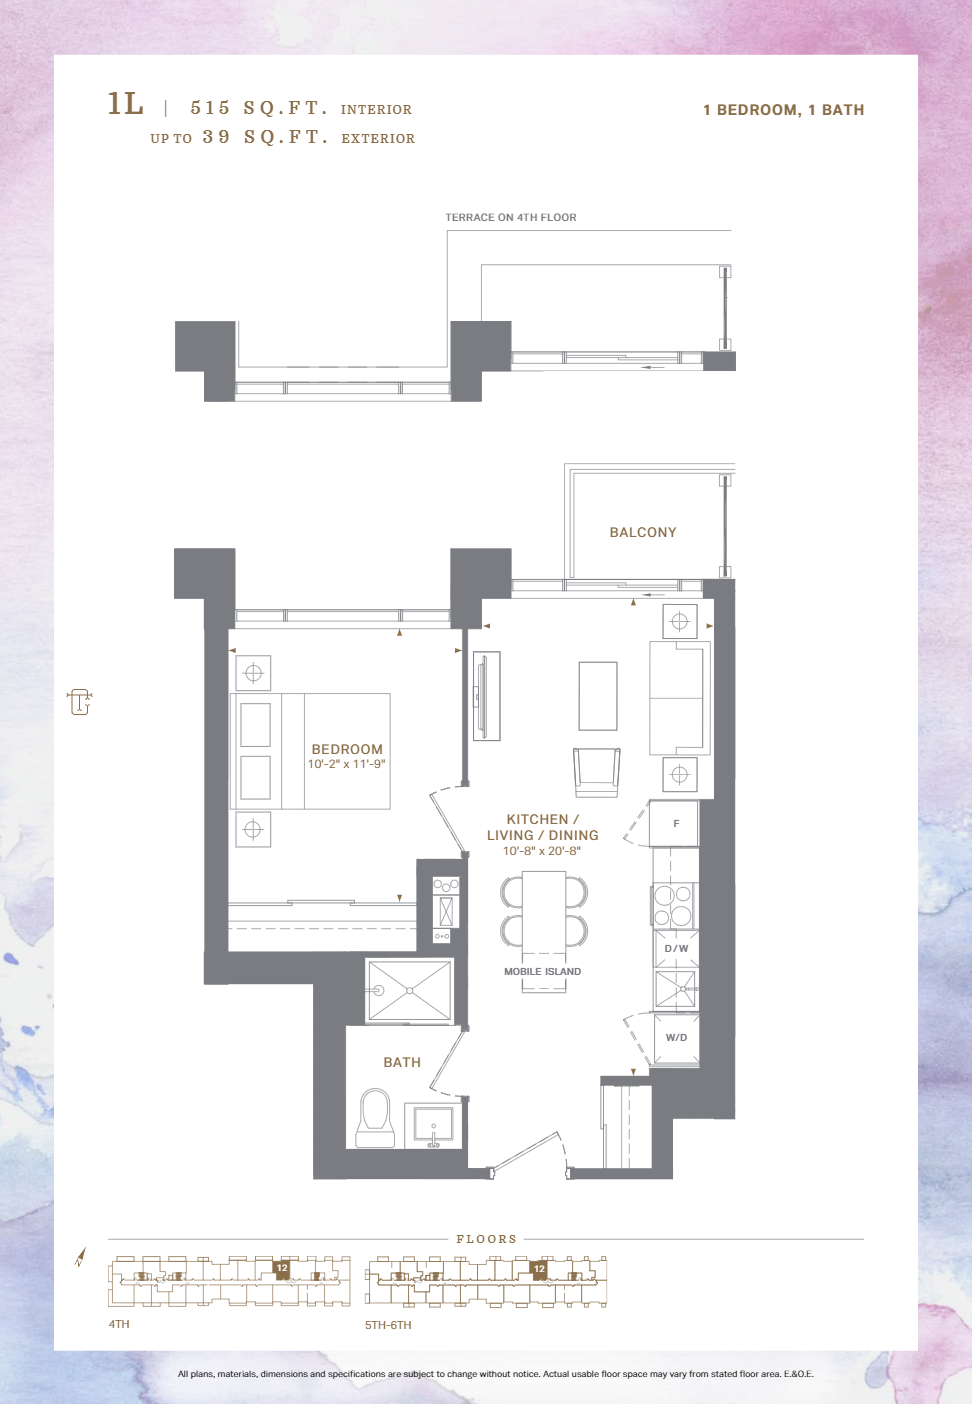  Floor Plan of The Charlotte Condos with undefined beds